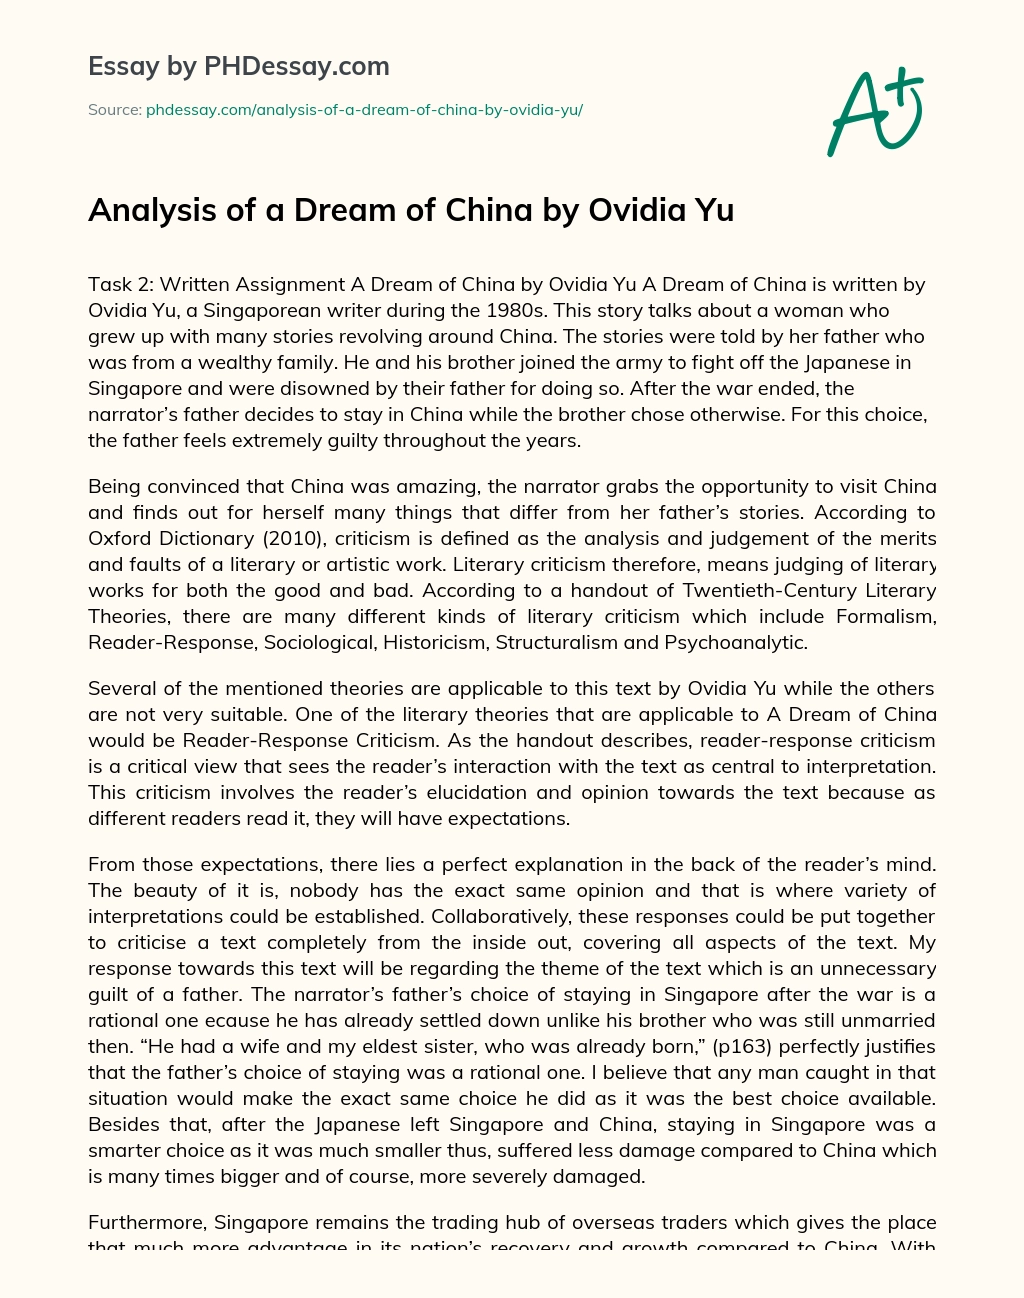 Analysis of a Dream of China by Ovidia Yu essay